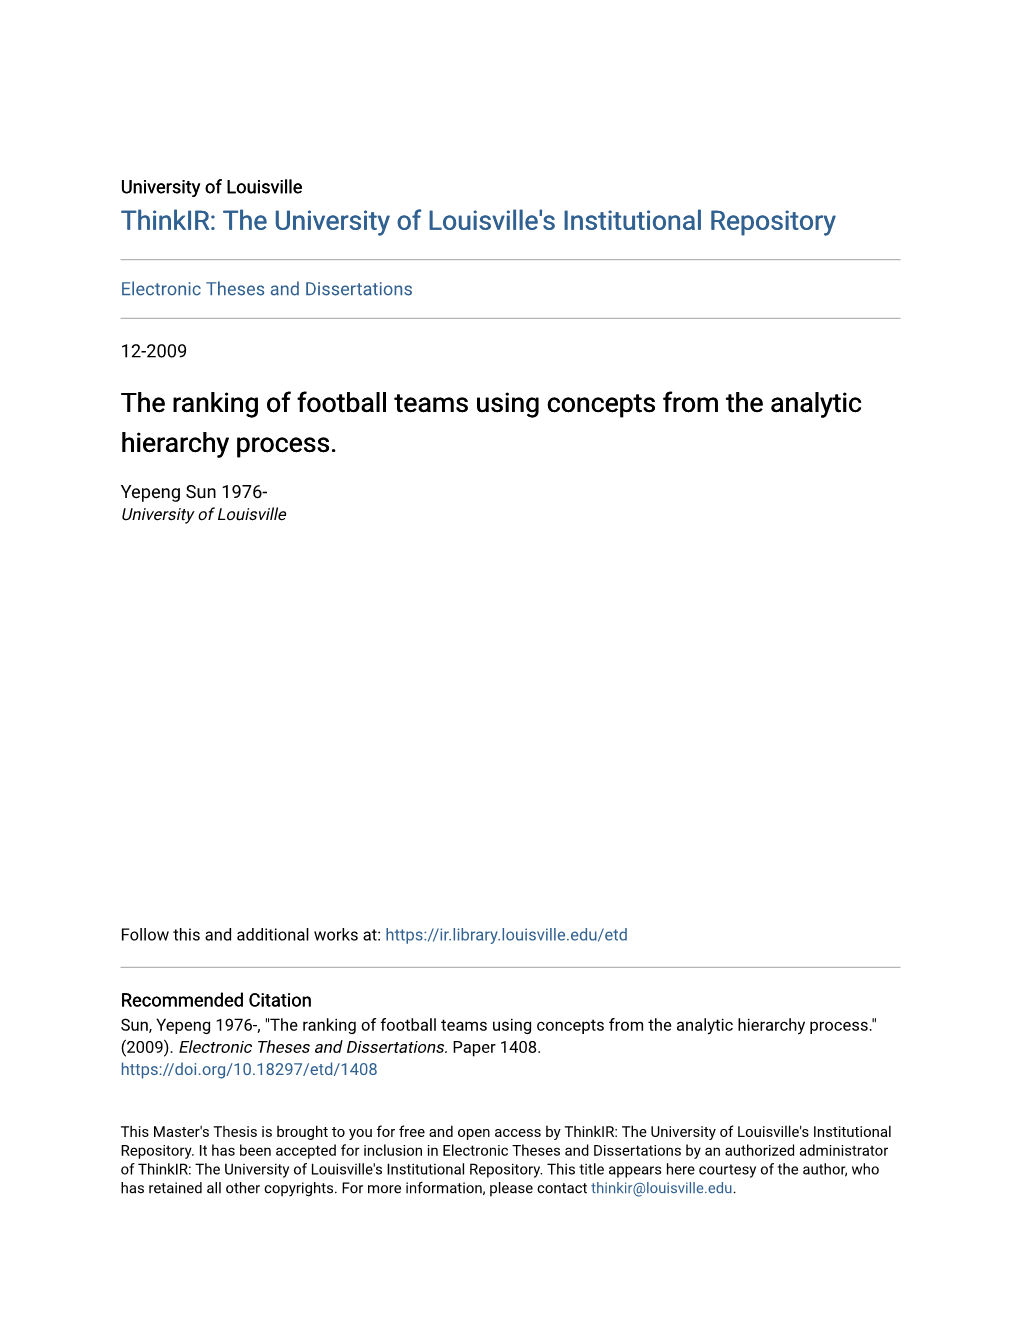 The Ranking of Football Teams Using Concepts from the Analytic Hierarchy Process